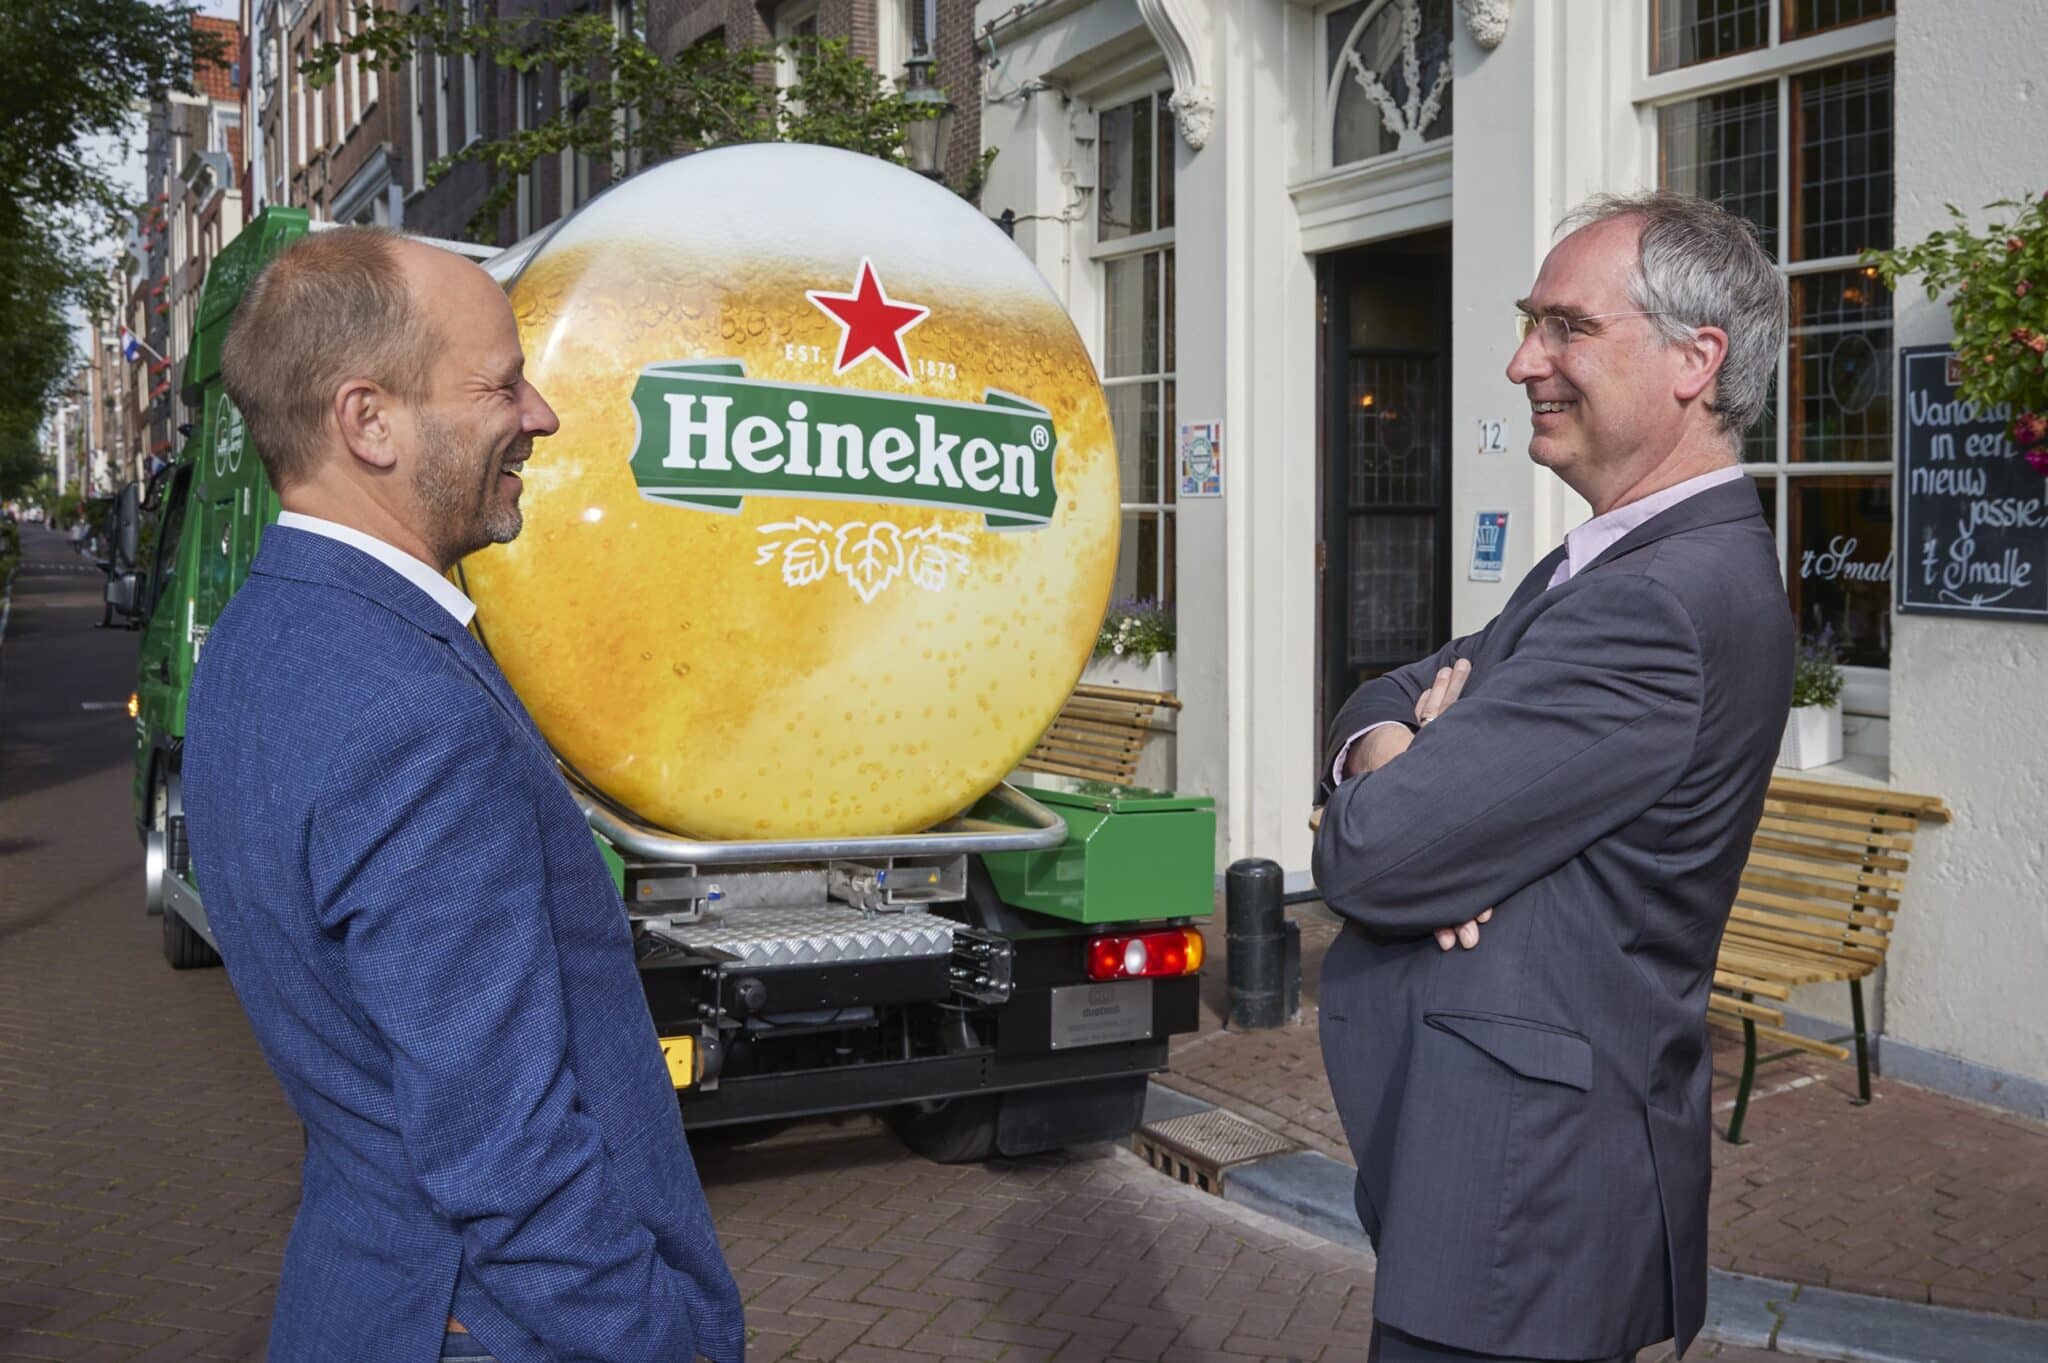 SUSTAINABLE BEER CAN. THE FUSO eCANTER AS A SPECIAL TANK TRUCK FOR HEINEKEN BREWERS.